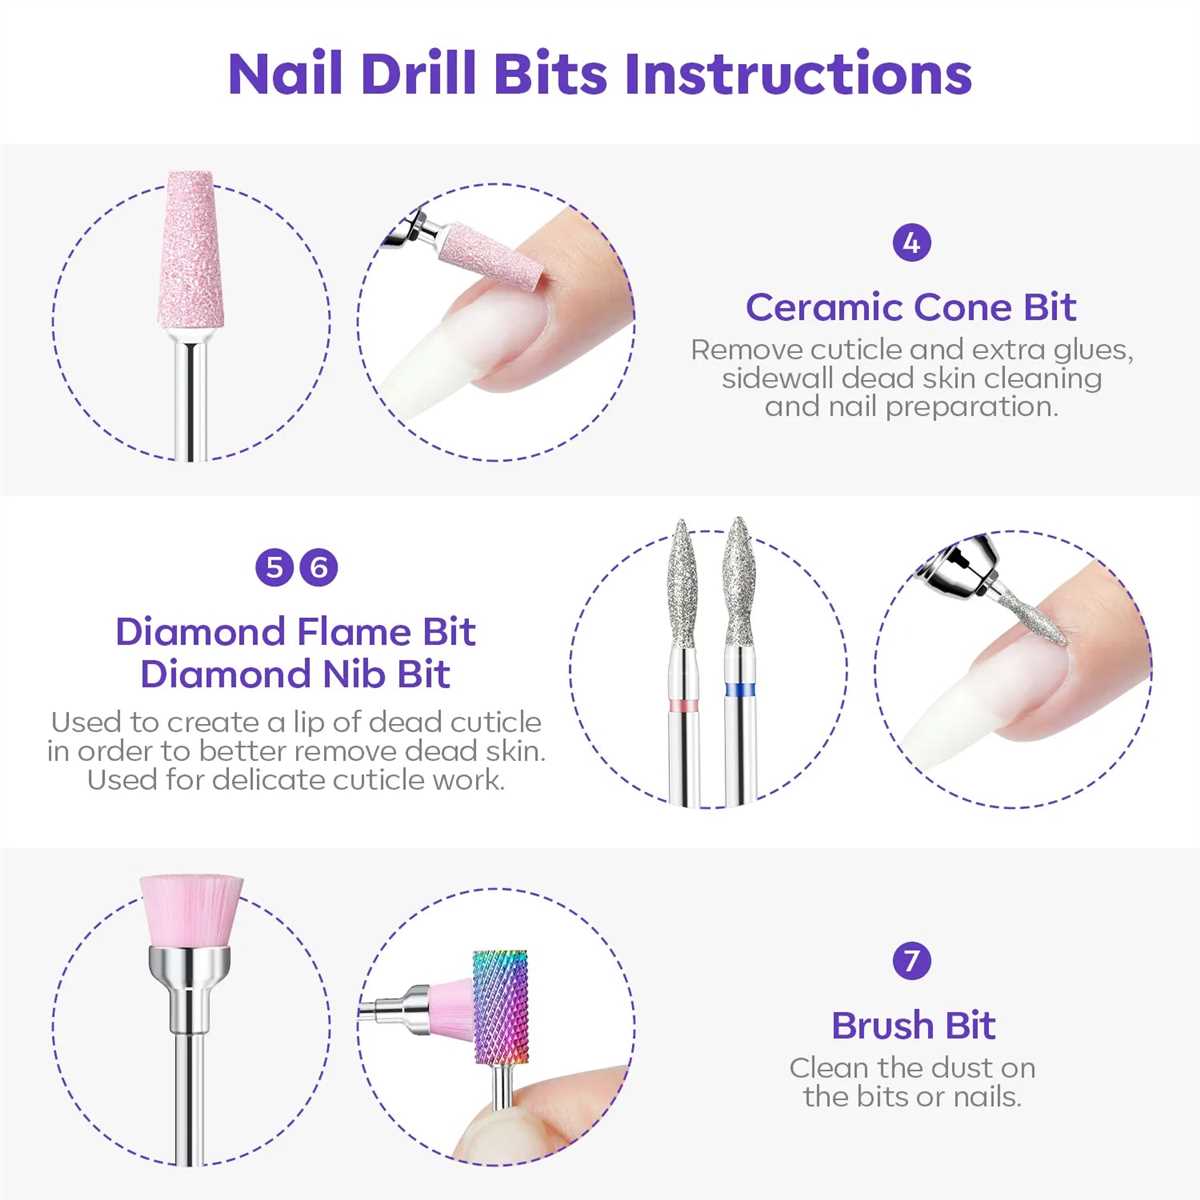 Choosing the Right Nail Drill Bit for Specific Nail Treatments